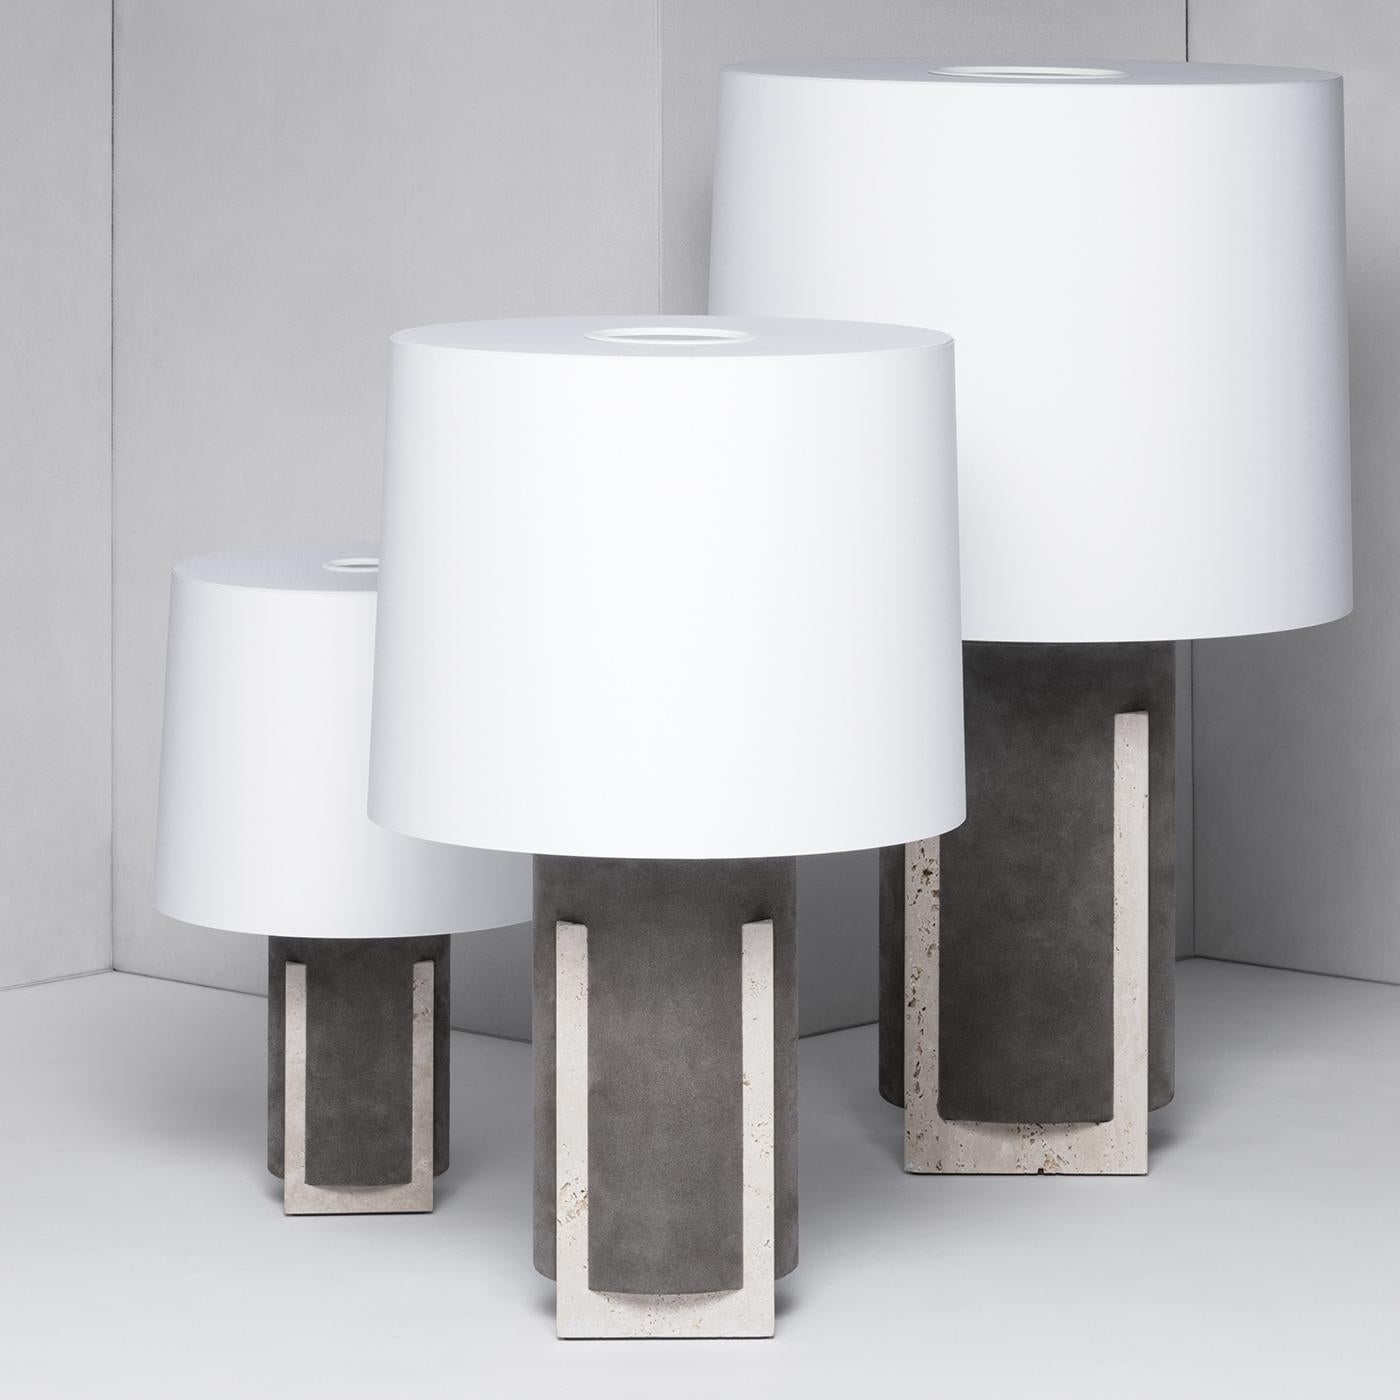 A captivating showcase of graphic sensibility, this exquisite lamp is a homage to the Classic architecture of Italian palazzos. The cylindrical body, crafted in brown nappa leather, rests atop a beige travertine limestone square base. Four